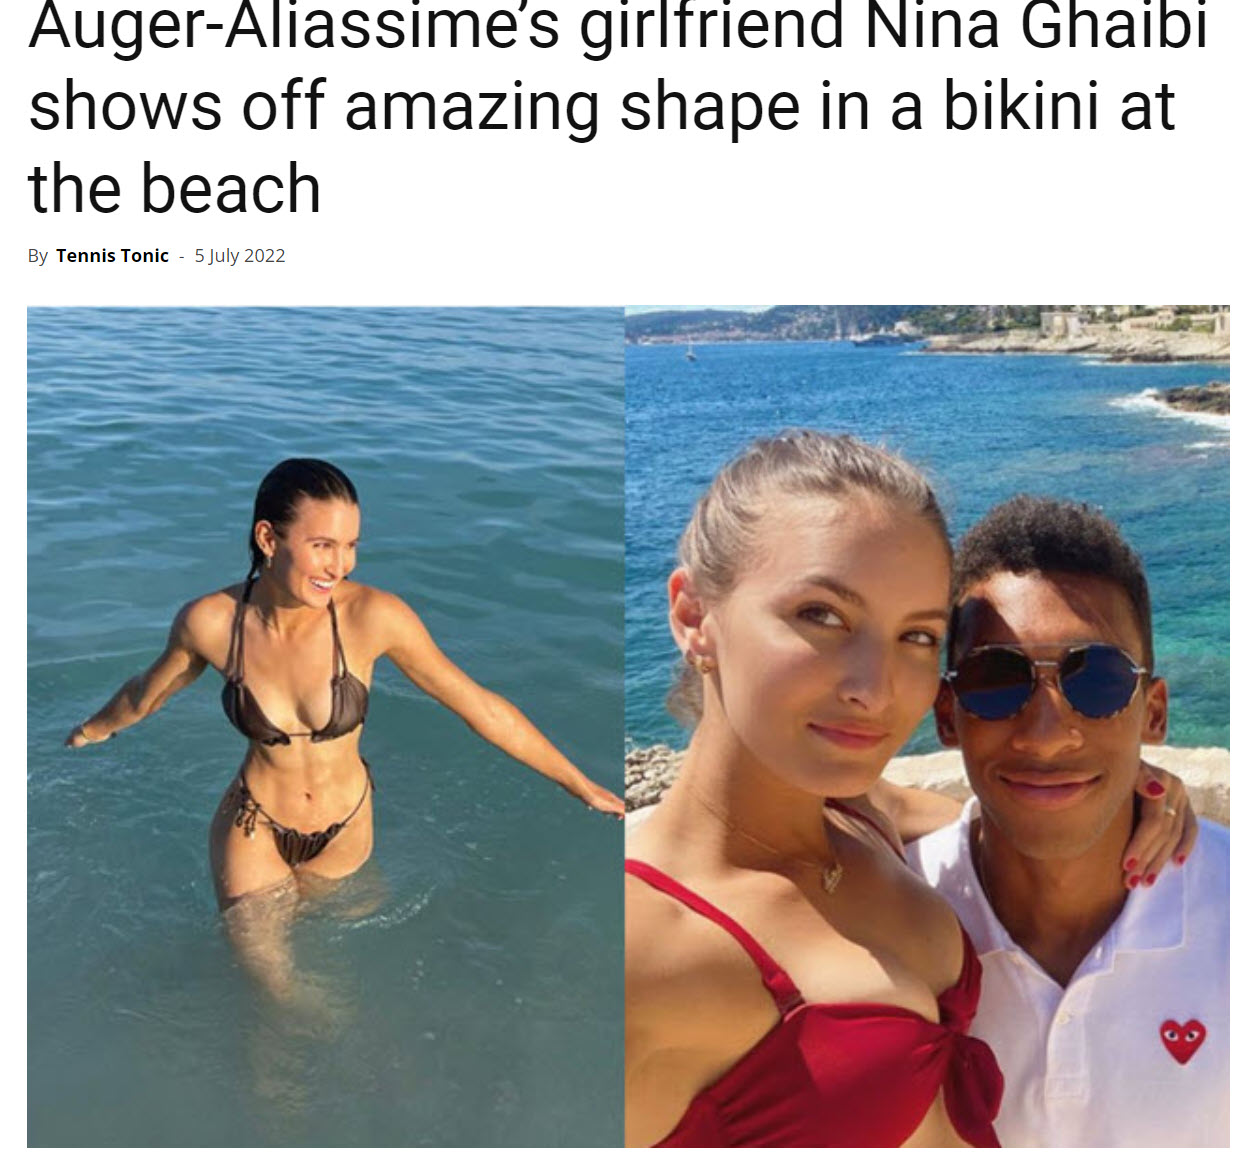 Who is Auger-Aliassime's girlfriend Nina Ghaibi with pictures